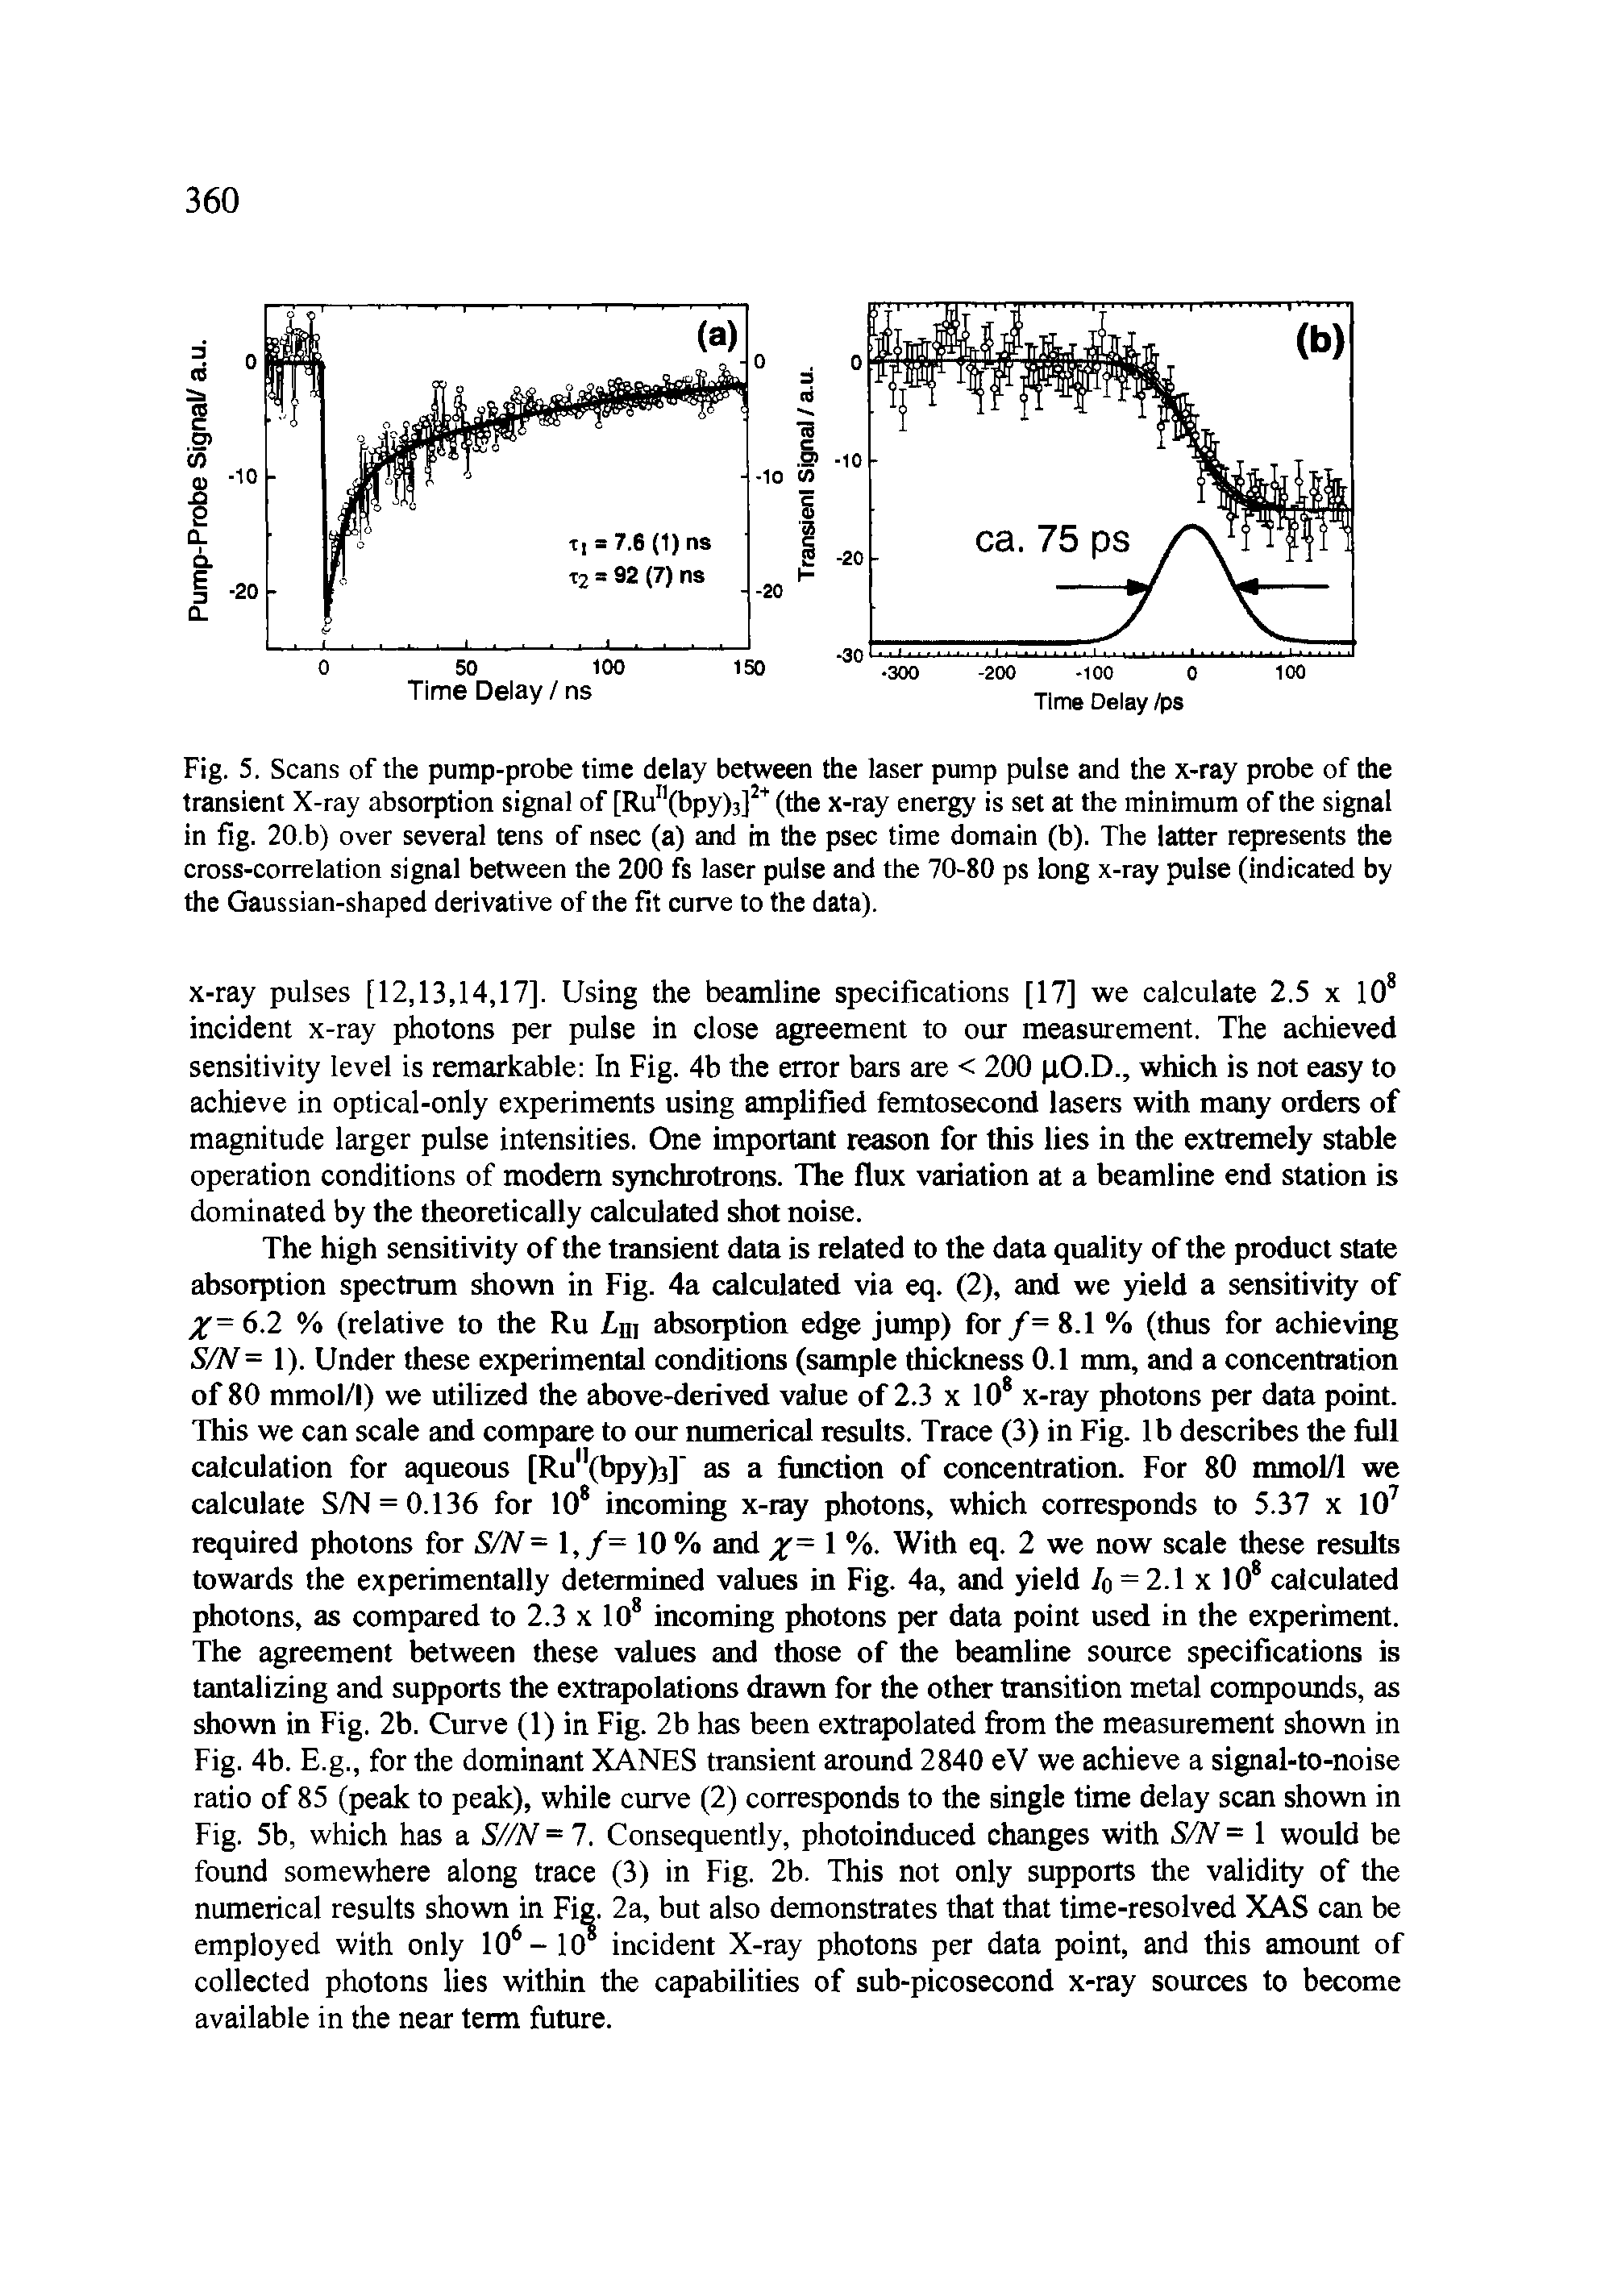 Fig. 5. Scans of the pump-probe time delay between the laser pump pulse and the x-ray probe of the transient X-ray absorption signal of [Run(bpy)3]2+ (the x-ray energy is set at the minimum of the signal in fig. 20.b) over several tens of nsec (a) and in the psec time domain (b). The latter represents the cross-correlation signal between the 200 fs laser pulse and the 70-80 ps long x-ray pulse (indicated by the Gaussian-shaped derivative of the fit curve to the data).